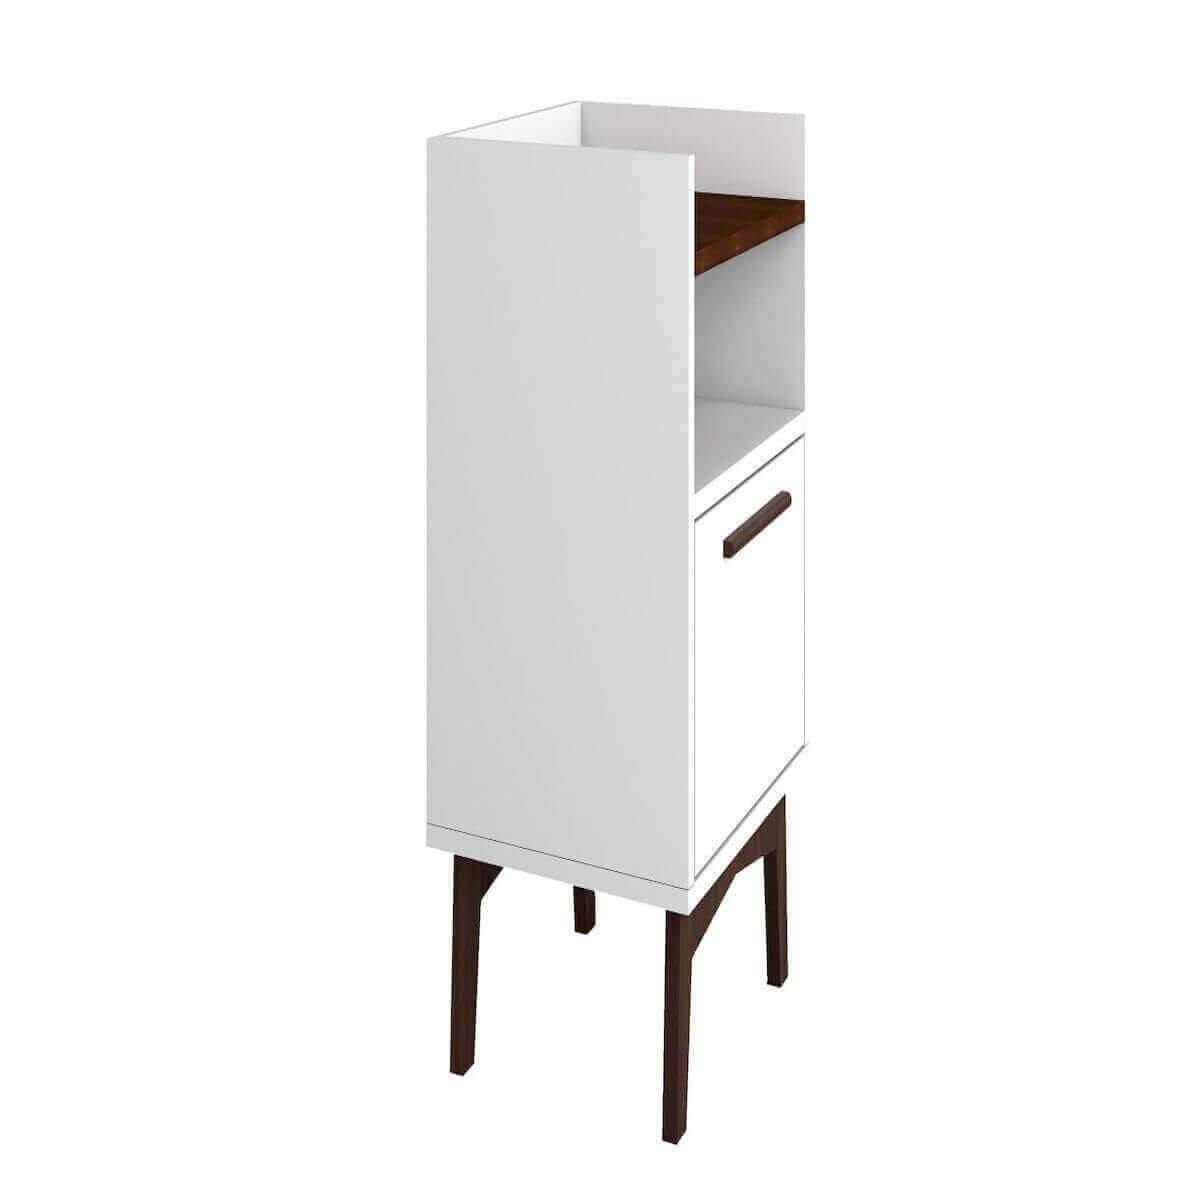 Manhattan Comfort Mid-Century Modern Brookdale Nightstand with 1 Shelf in White and Nut Brown 141AMC209 Side